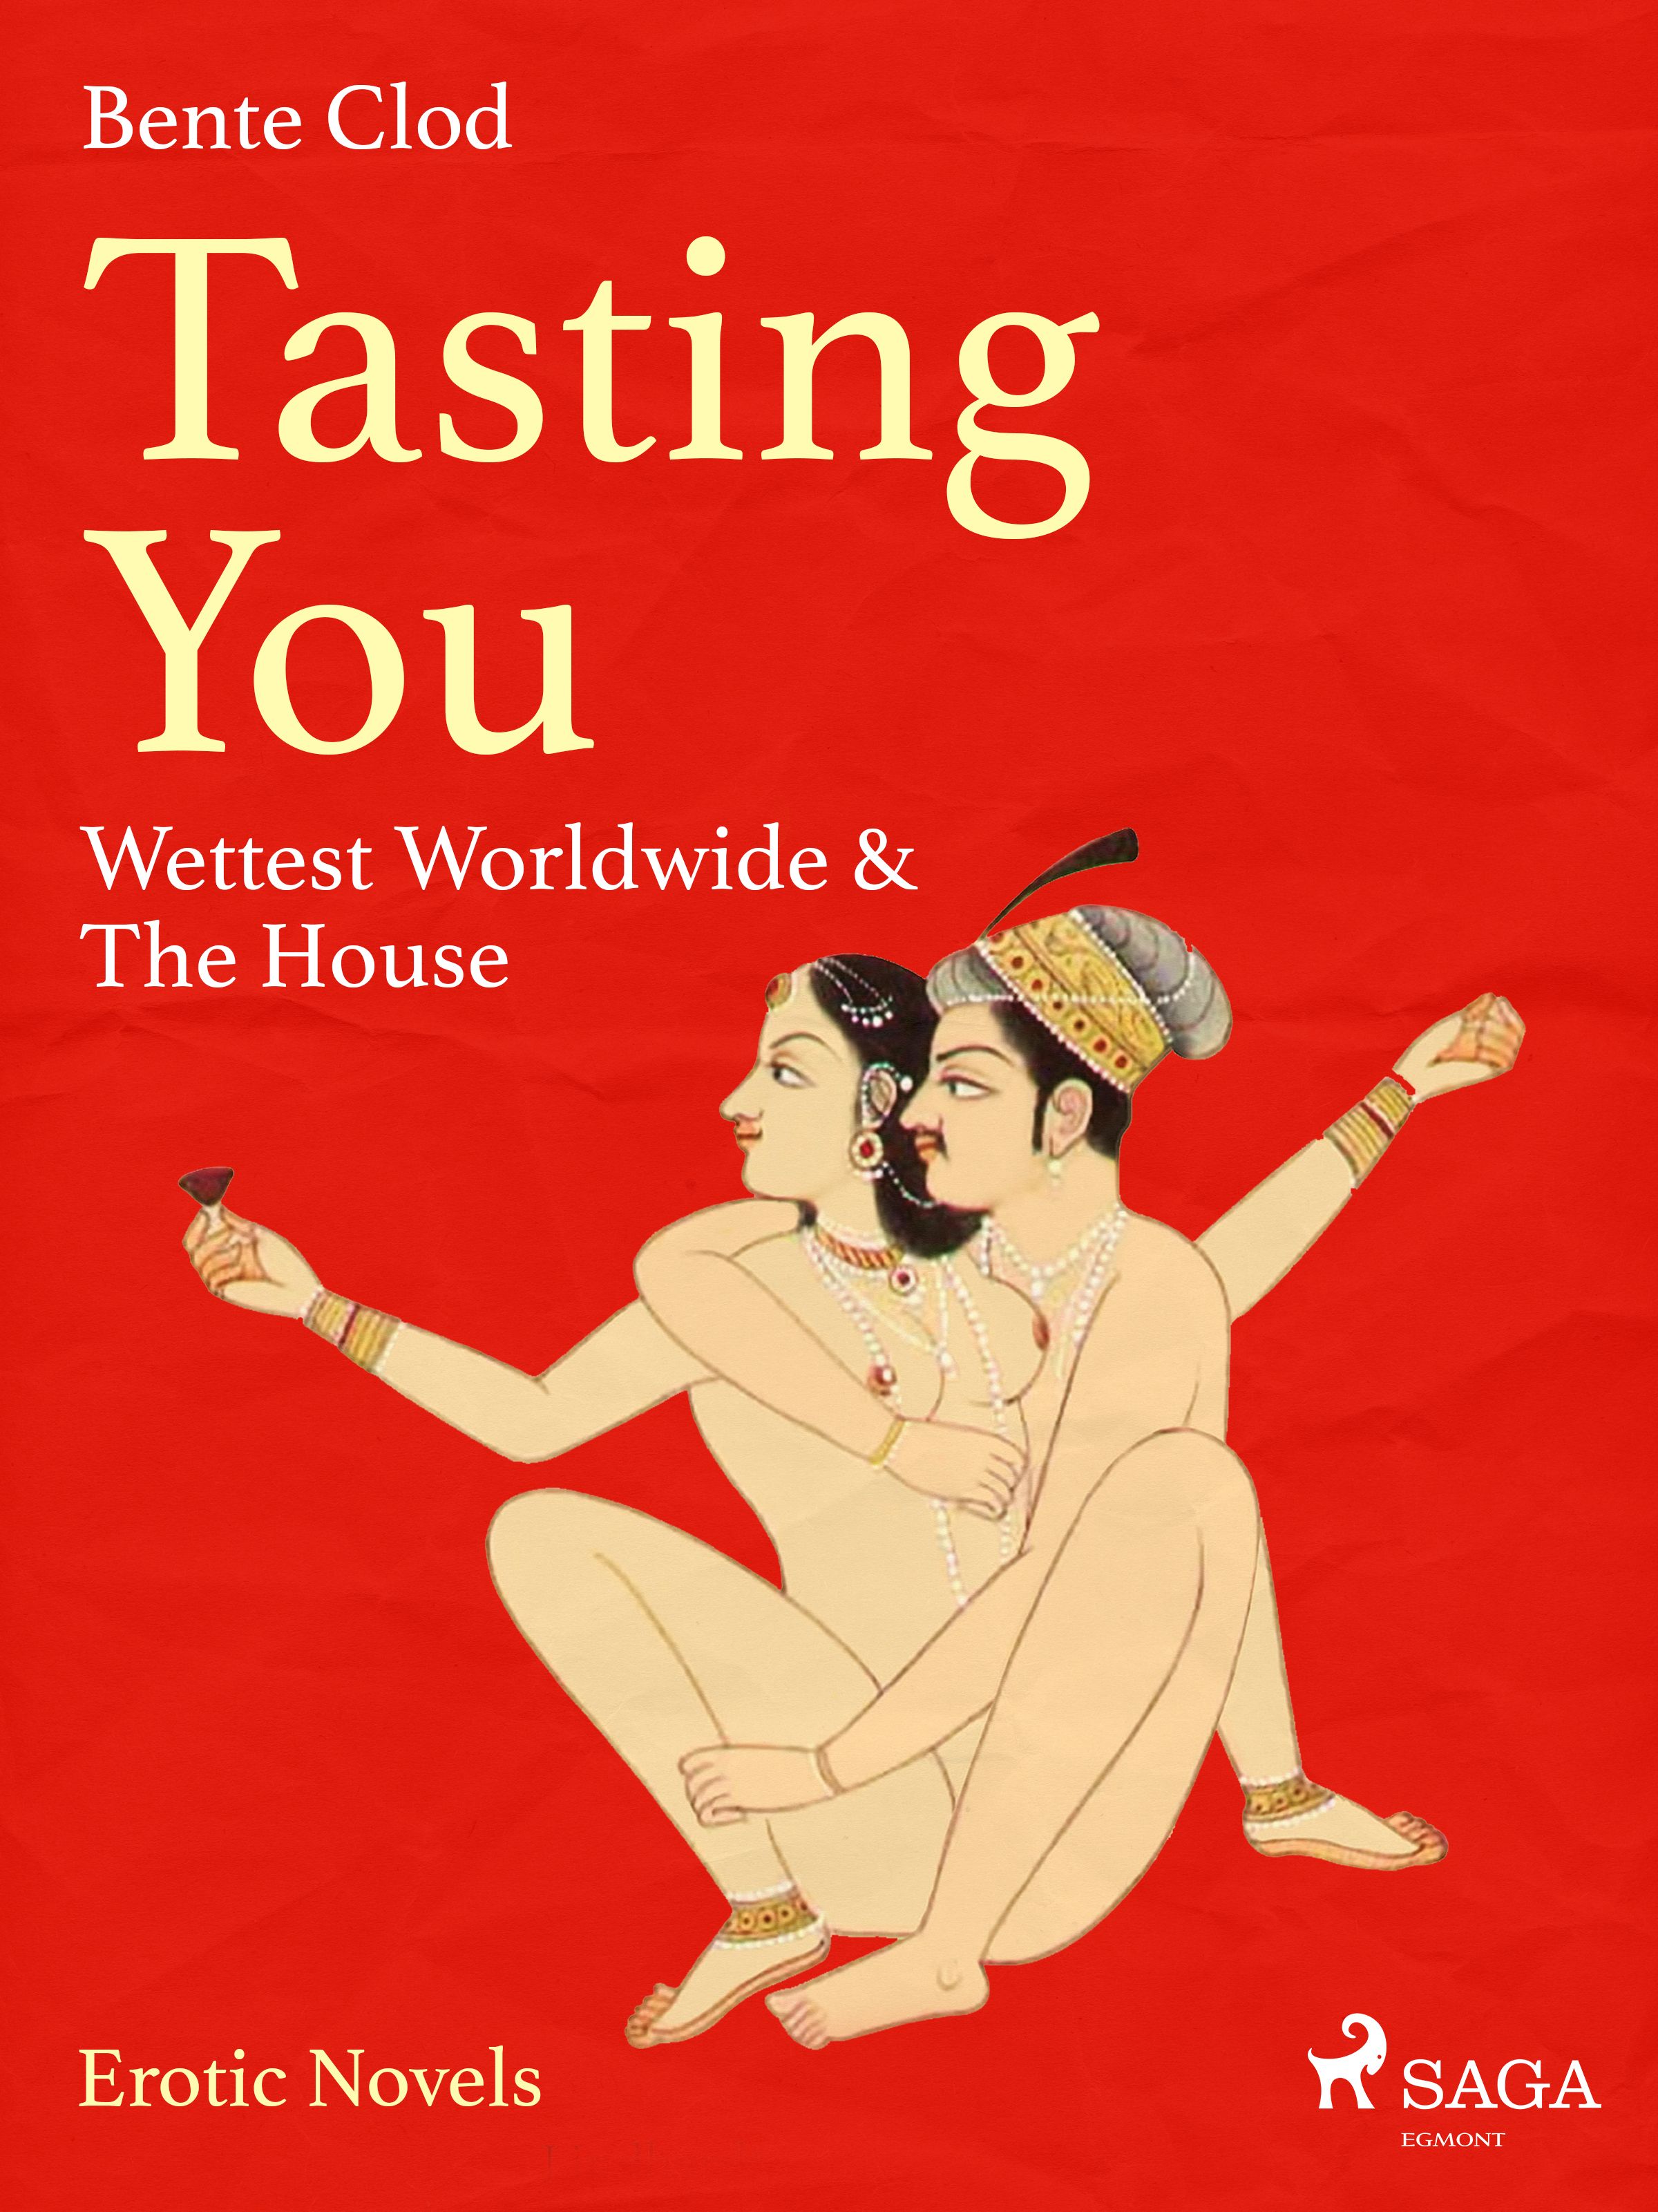 Tasting You: Wettest Worldwide & The House, eBook by Bente Clod